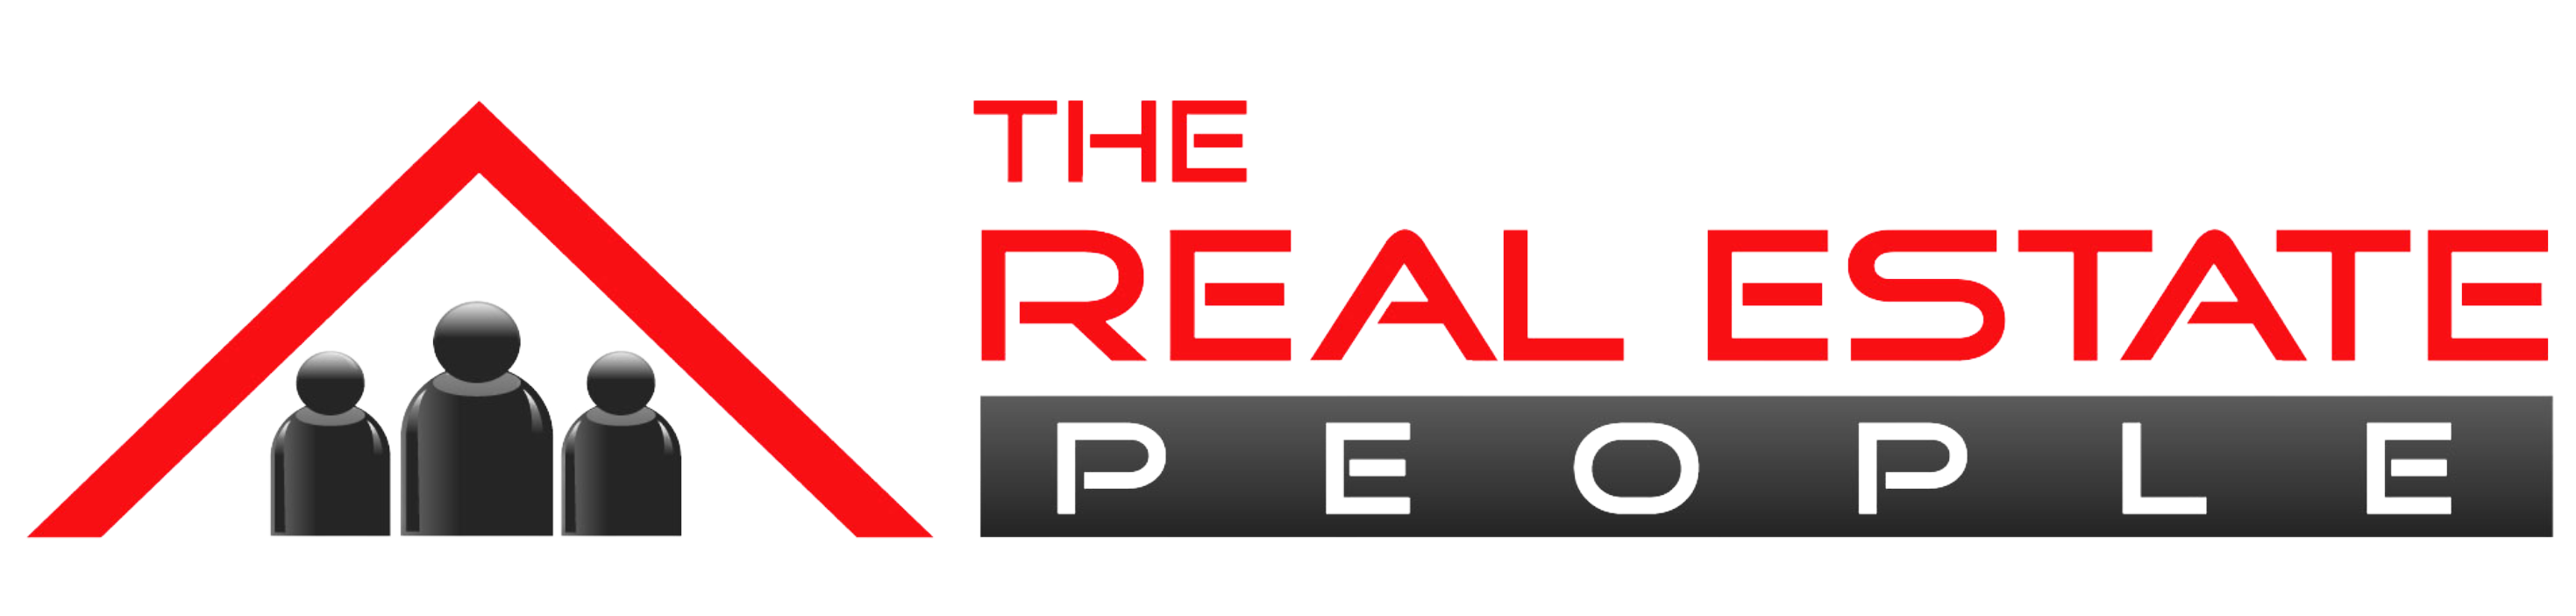 The Real Estate People